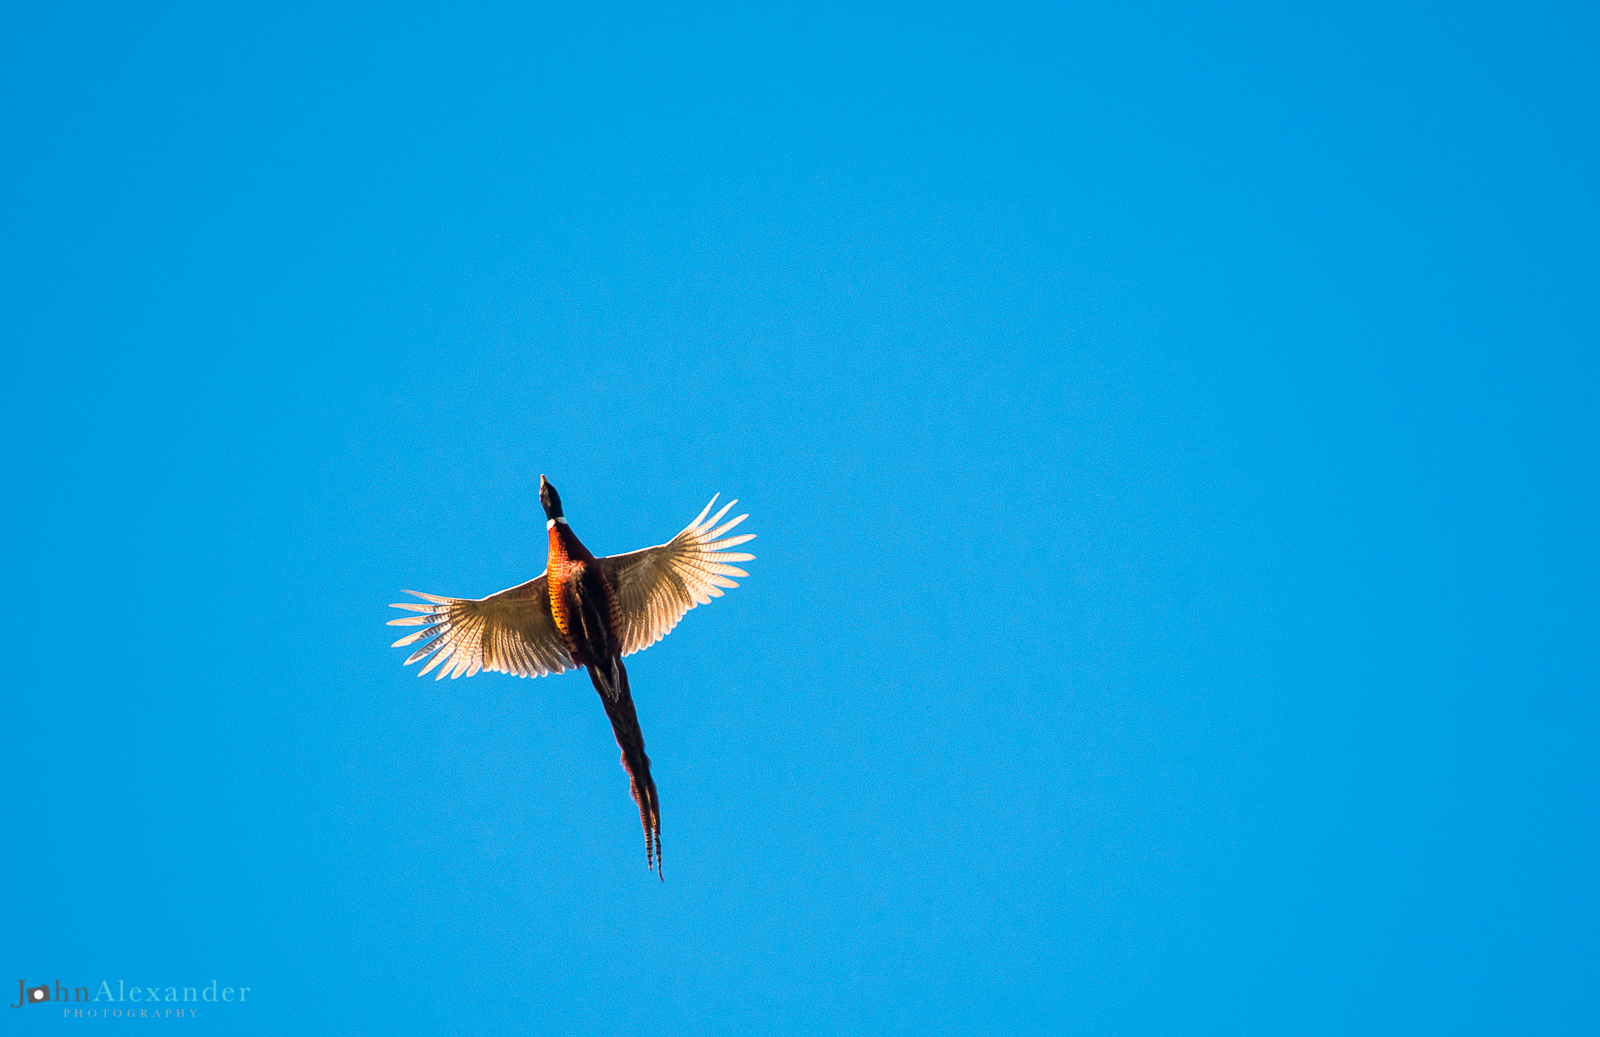 cock pheasant flying from below with blue sky